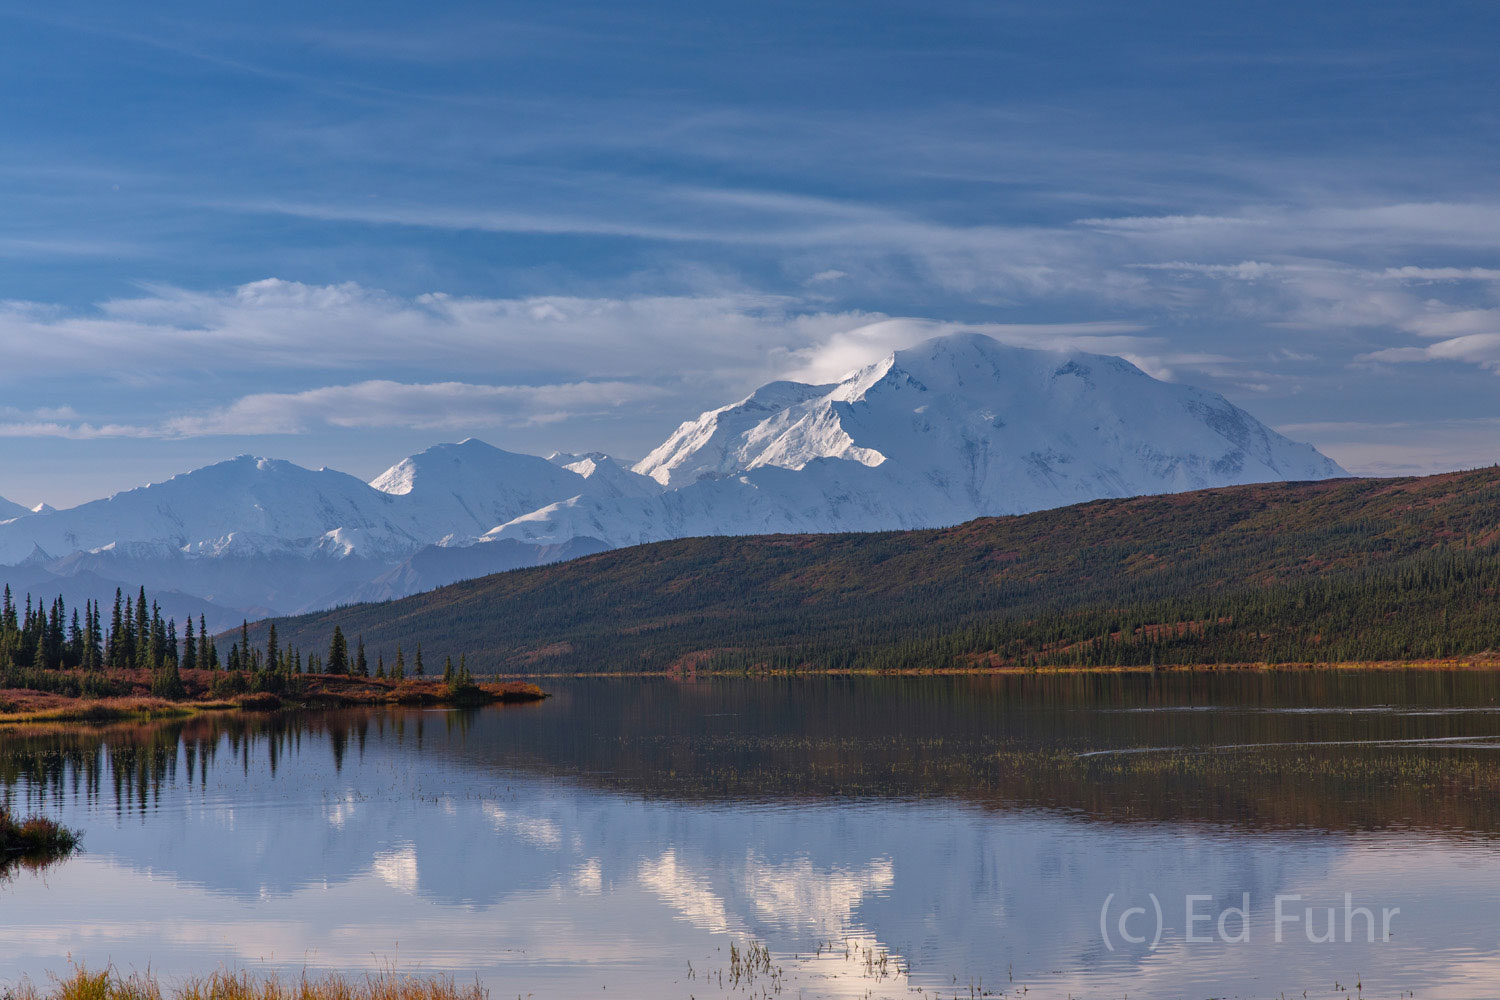 From the shoreline of Wonder Lake, Denali stands clear this September morning.